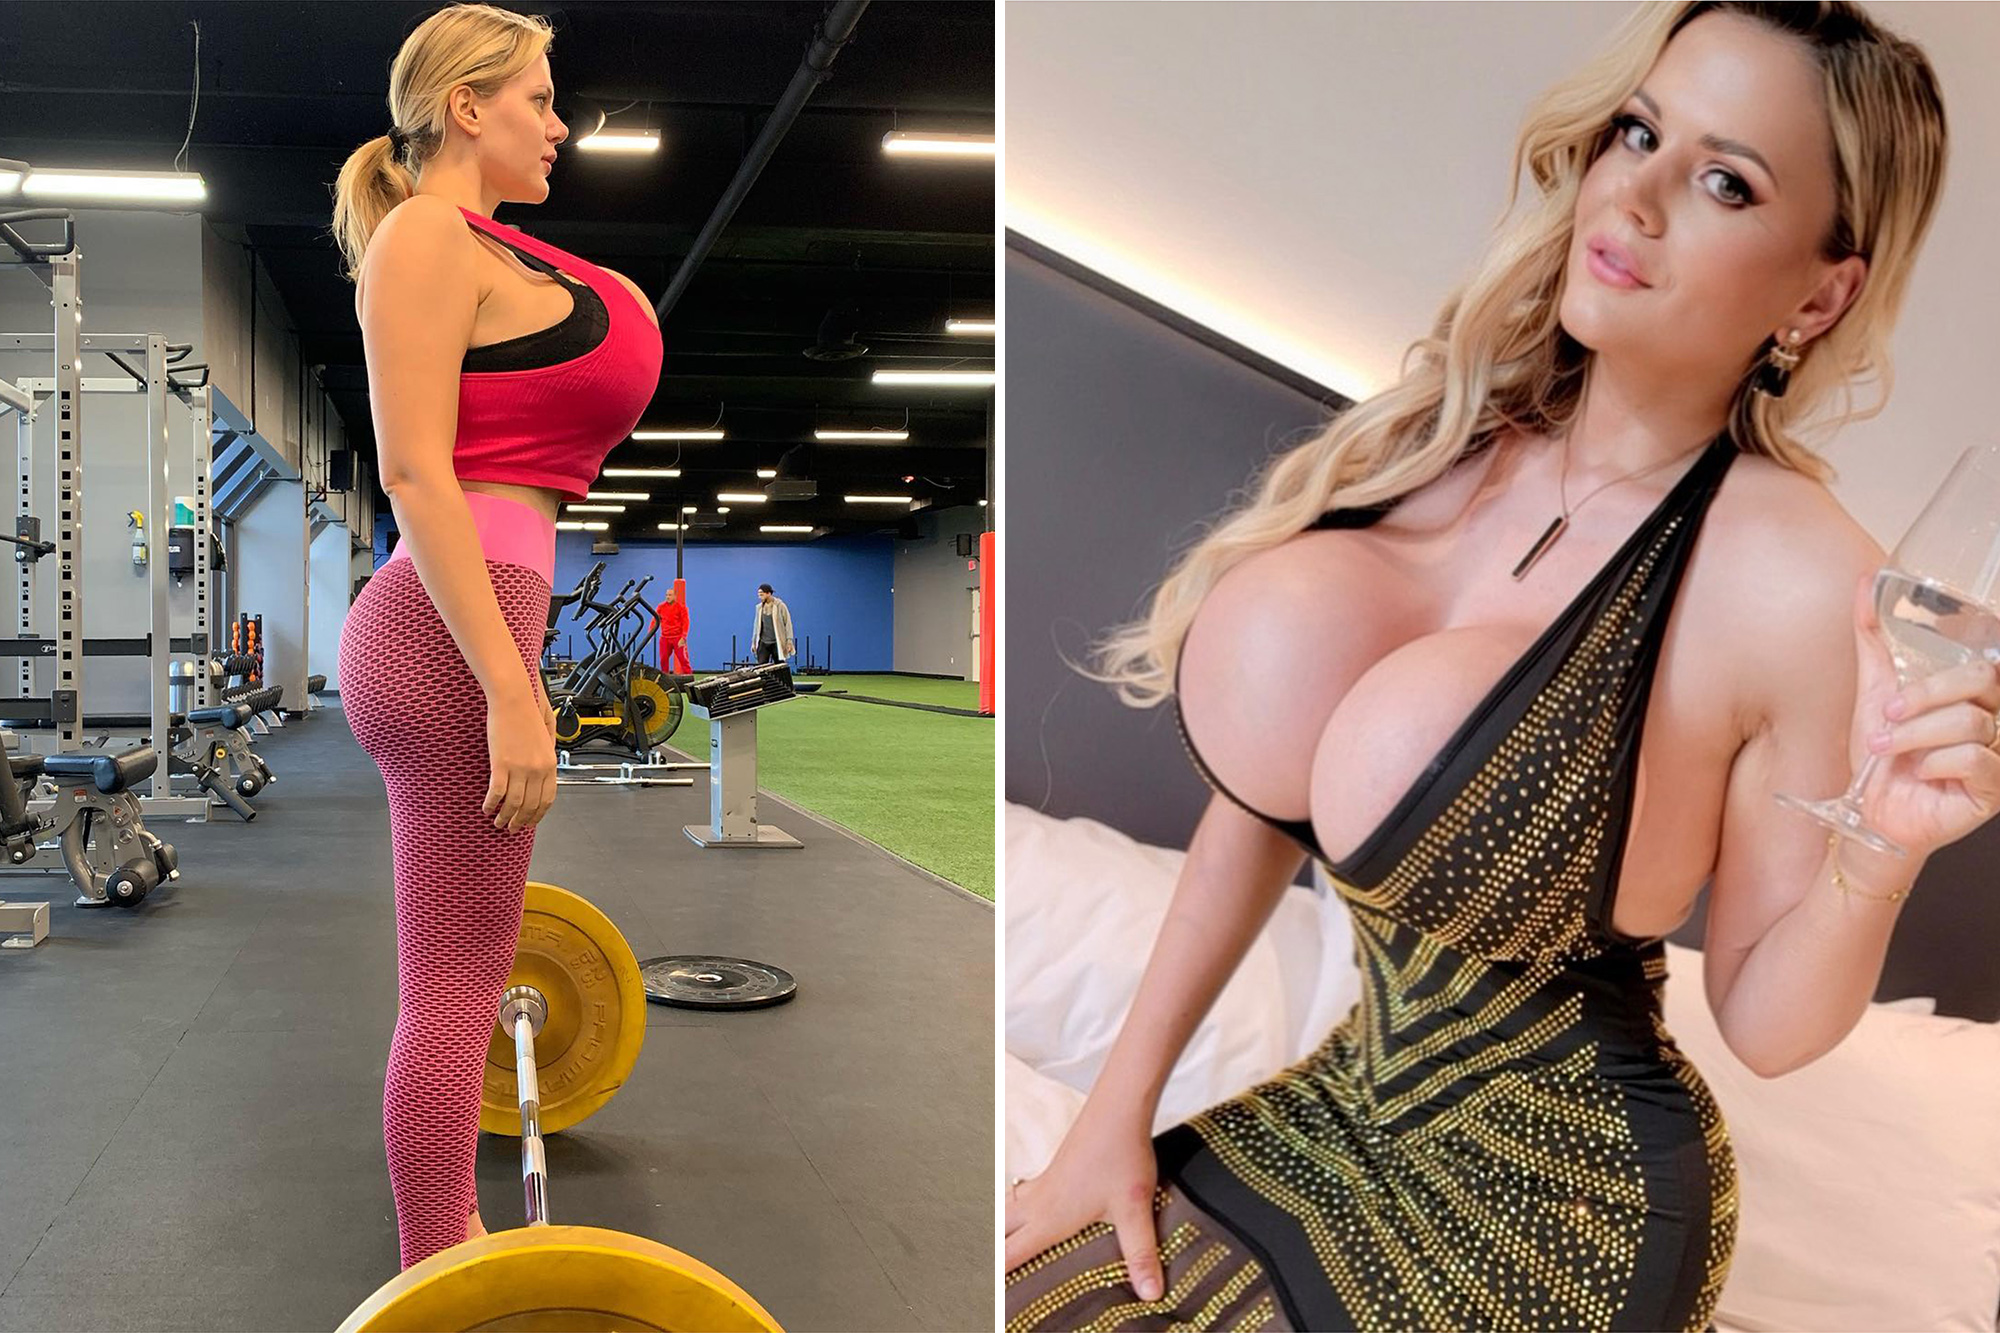 amber stansbury recommends 36 k cup boobs pic